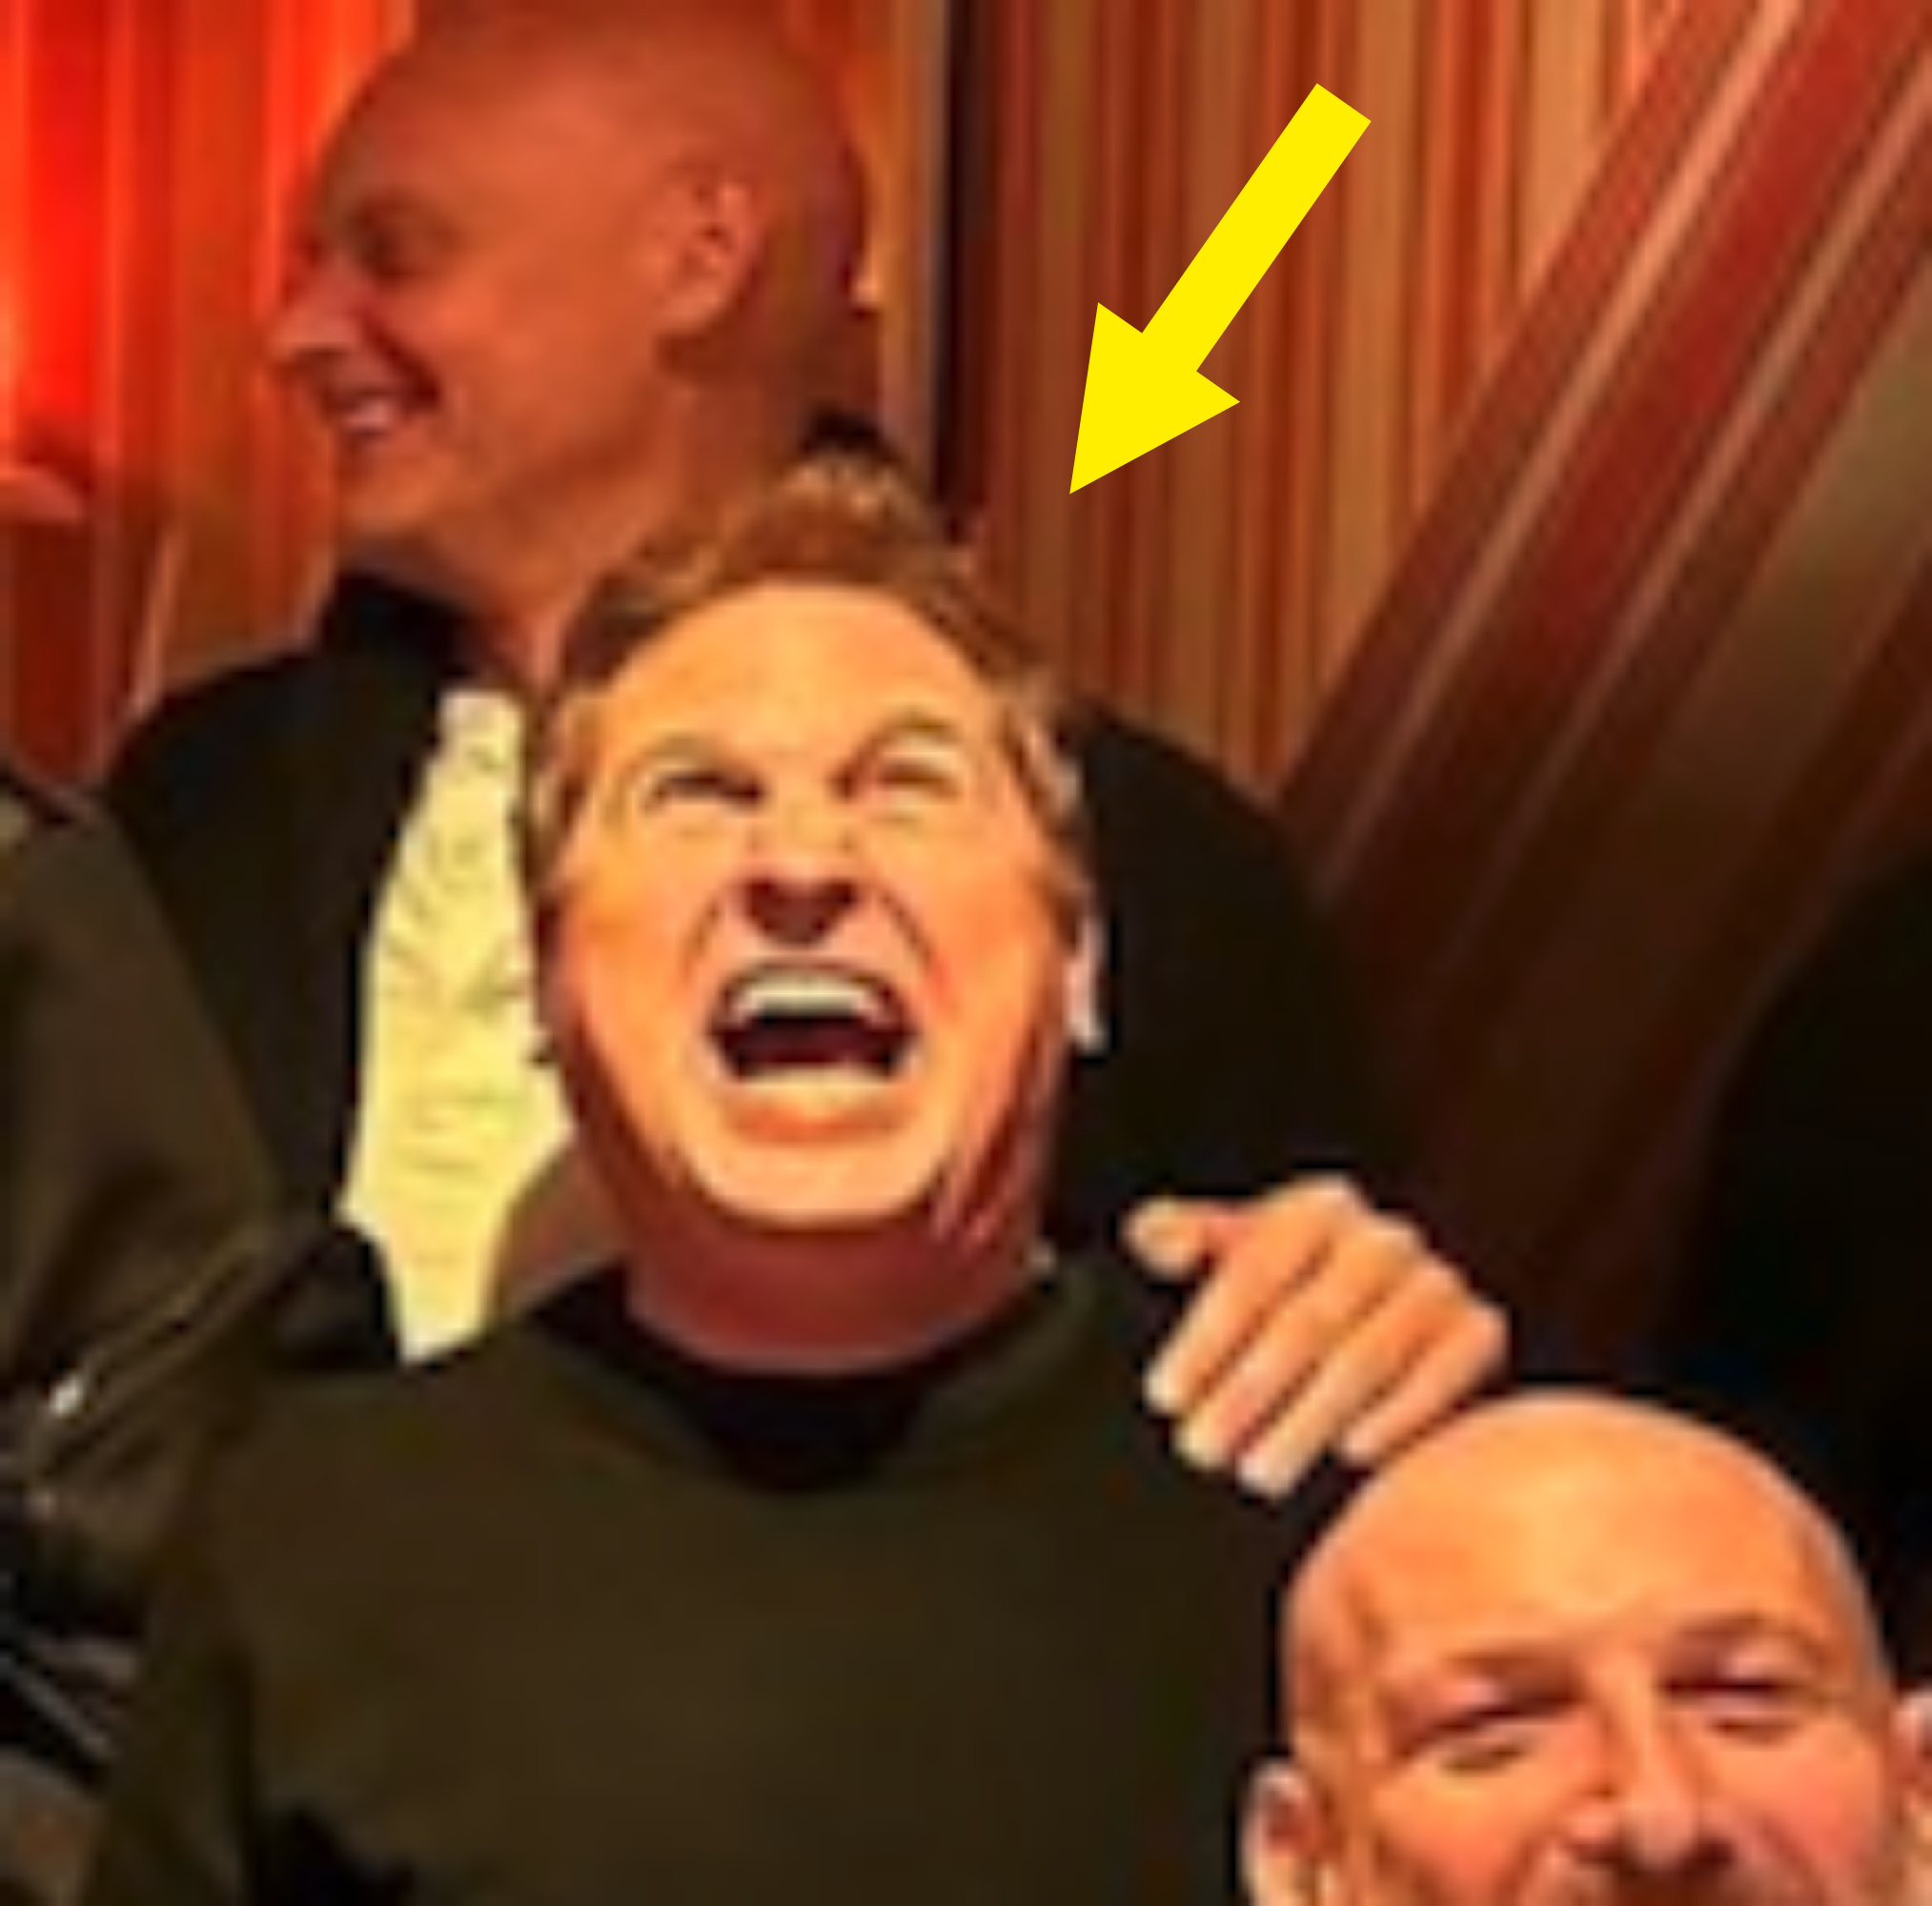 Arrow pointing to Paul (in front of Paul Vincent) laughing